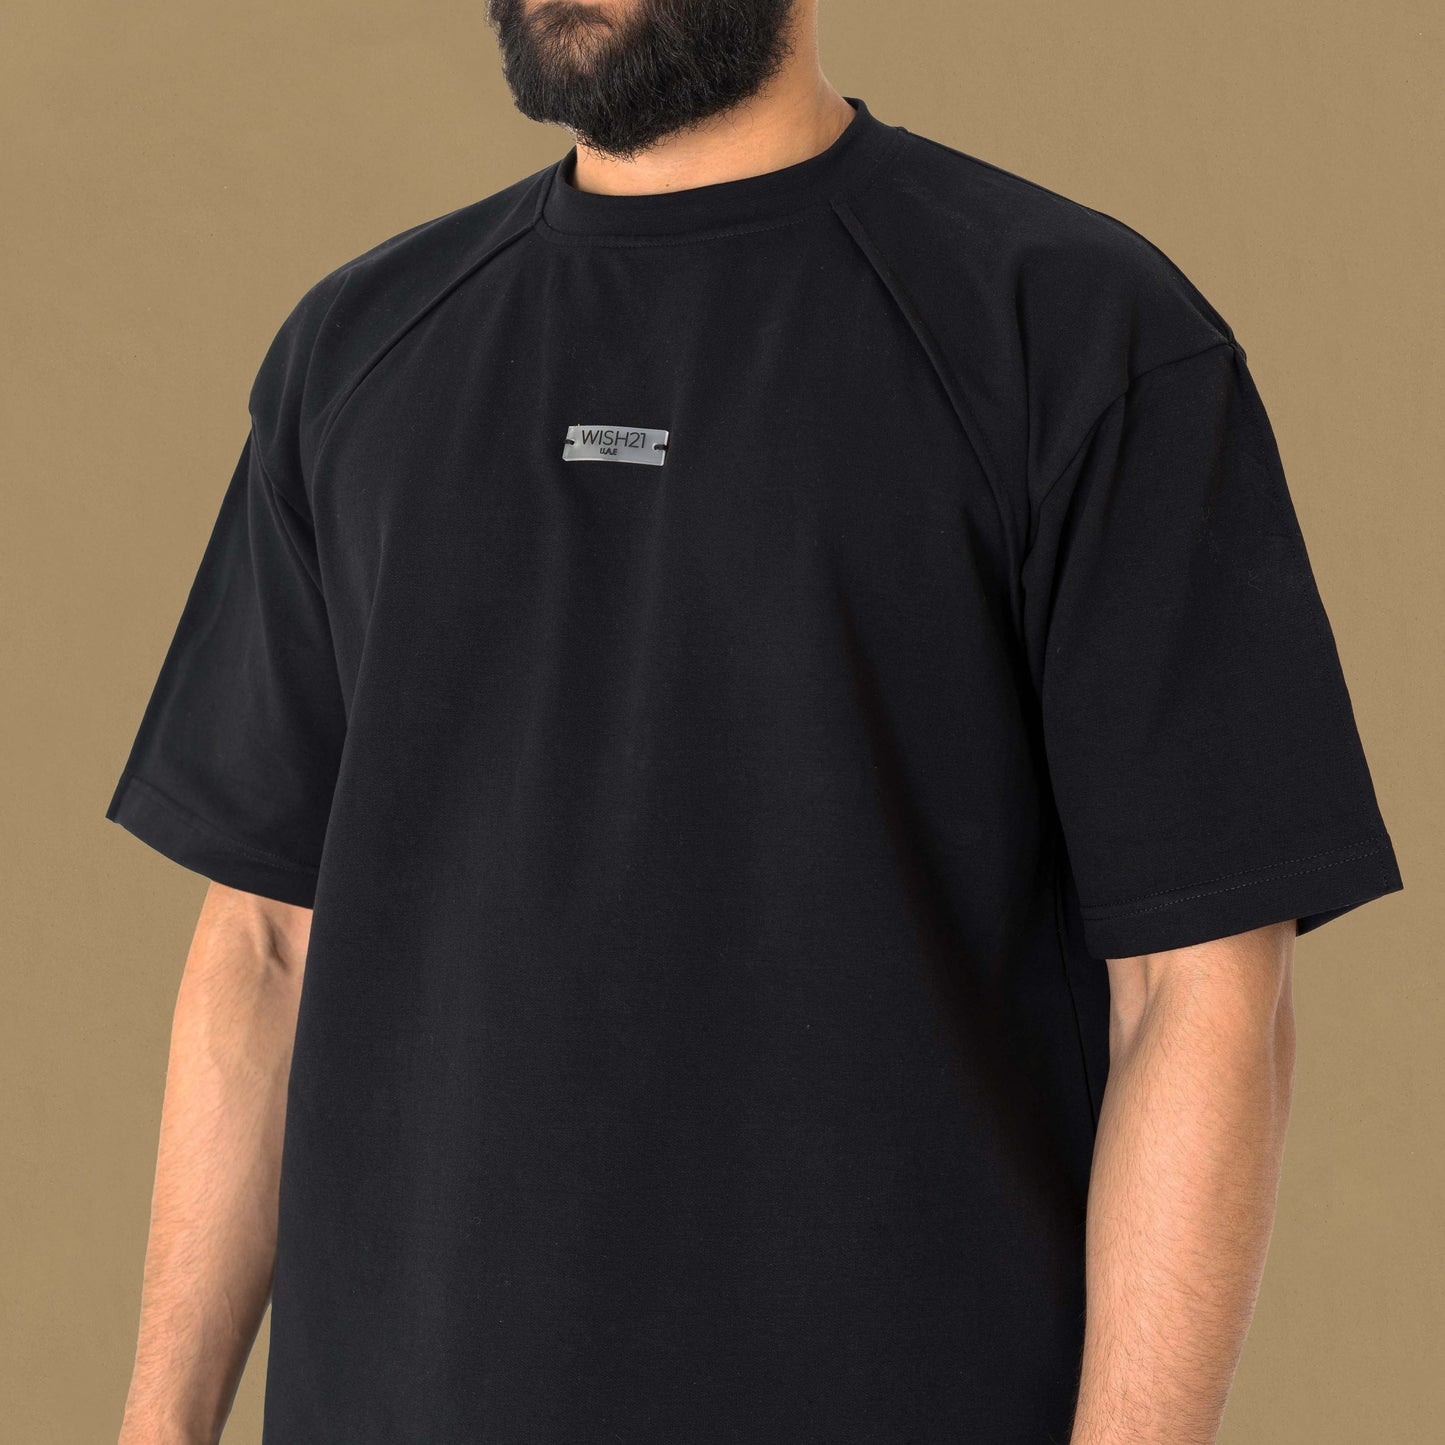 OVERSIZED T-SHIRT , BRAND NAME ENGRAVED ON PLASTIC IN THECHEST